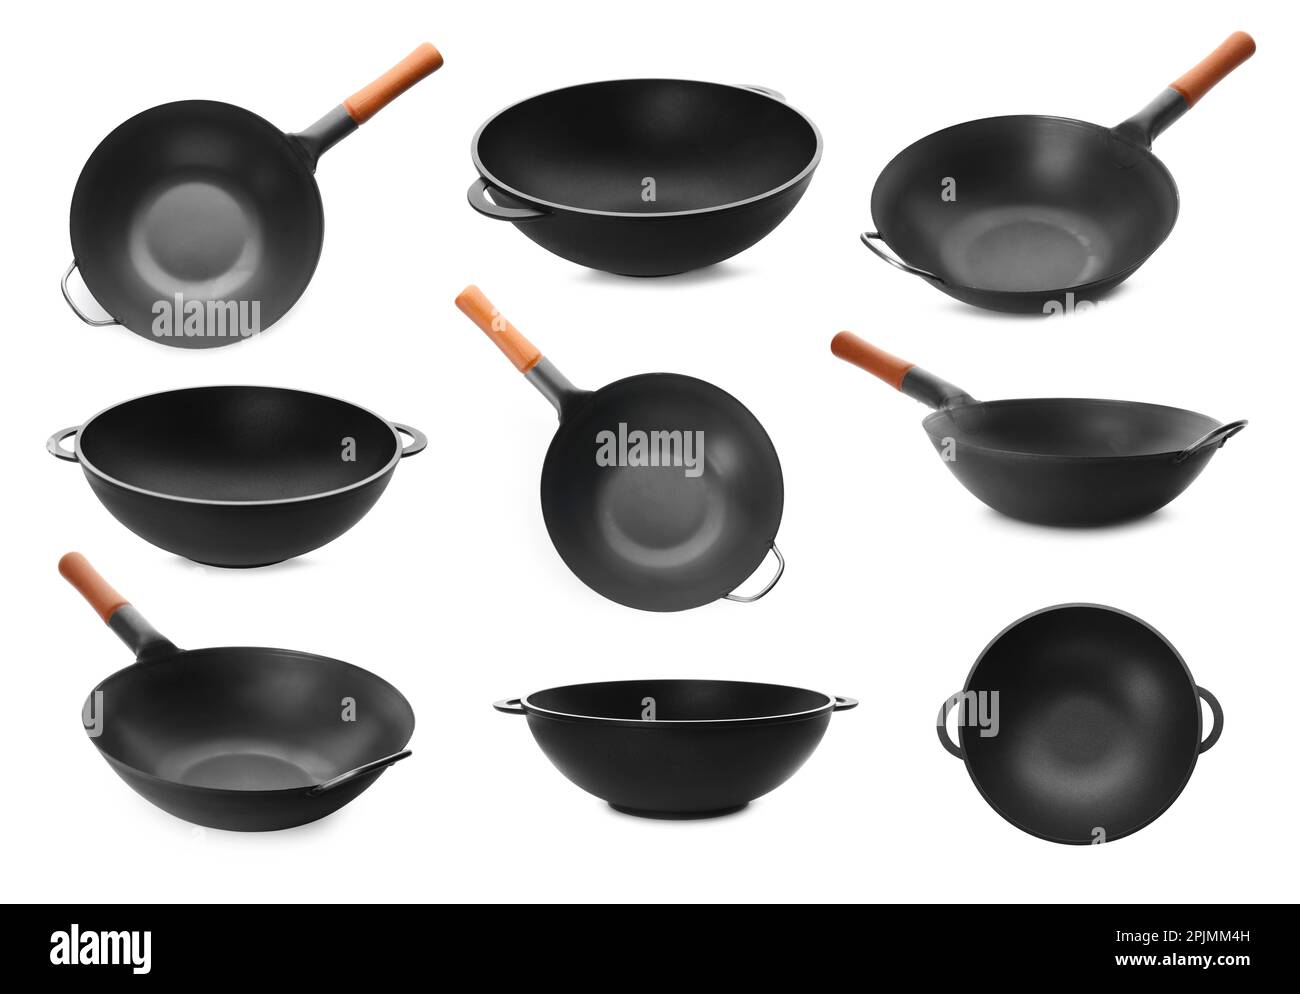 A Big Black Wok For Cooking On White Stock Photo, Picture and